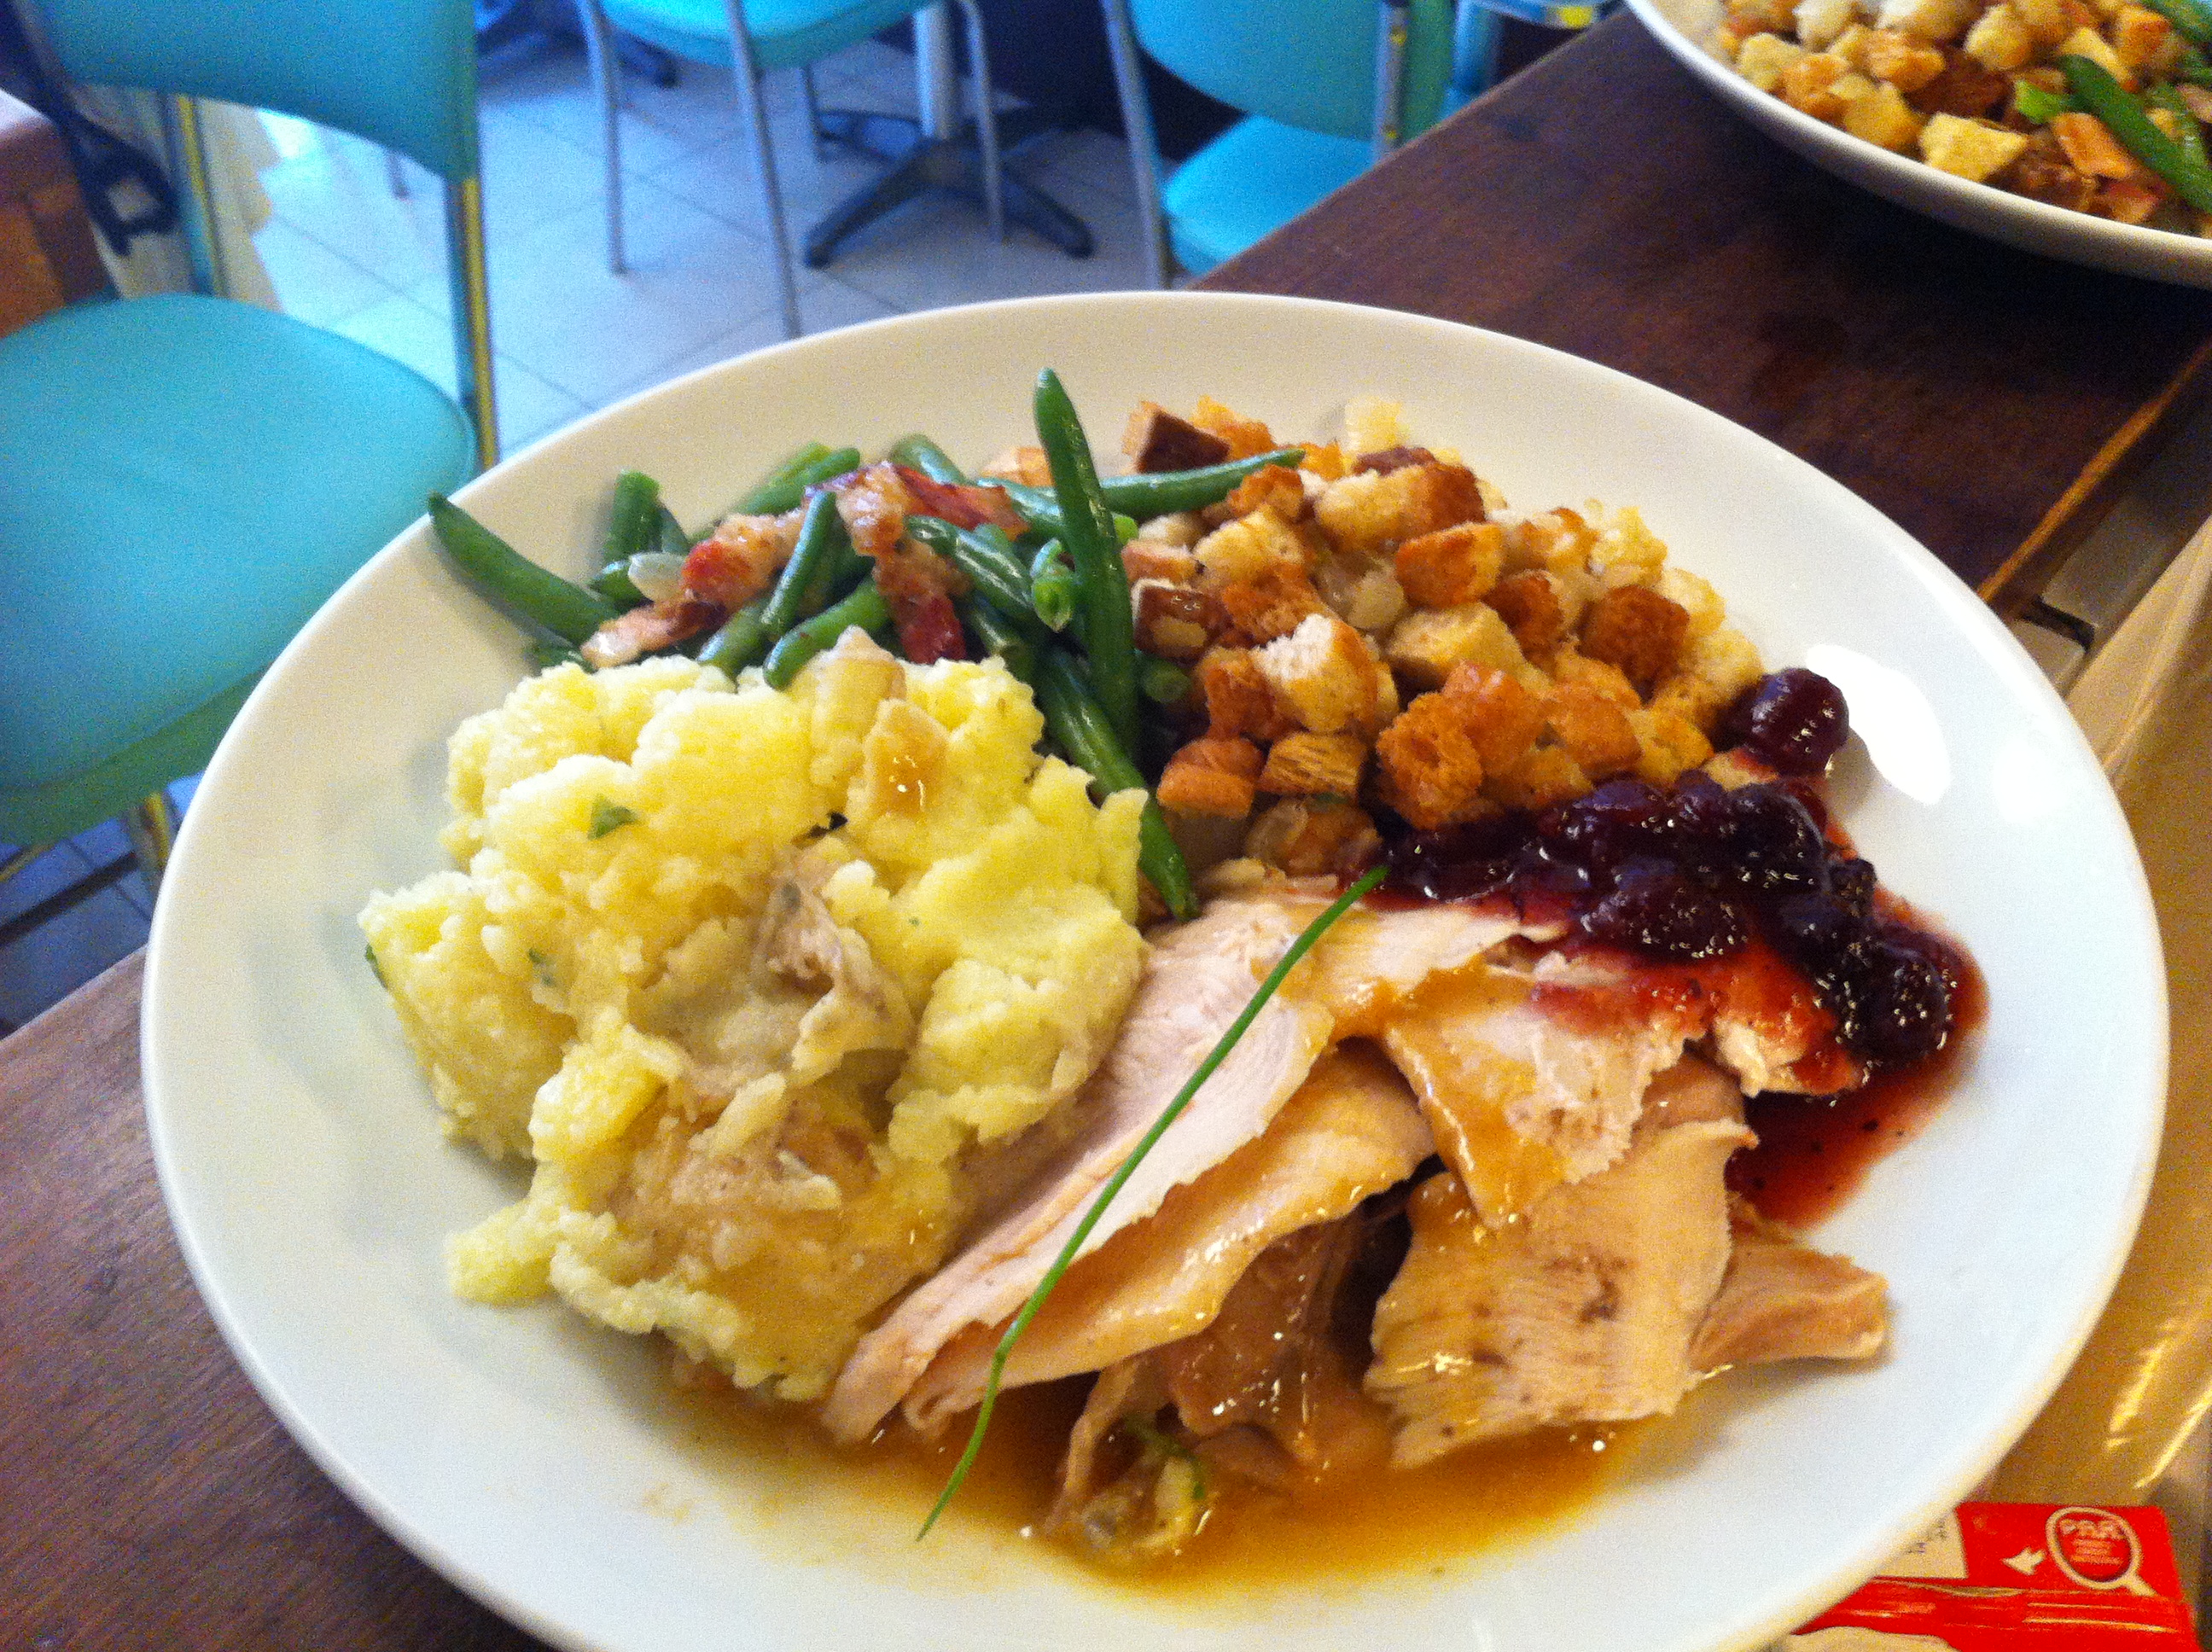 Thanksgiving Dinner 2014 at the Gringo Cafe